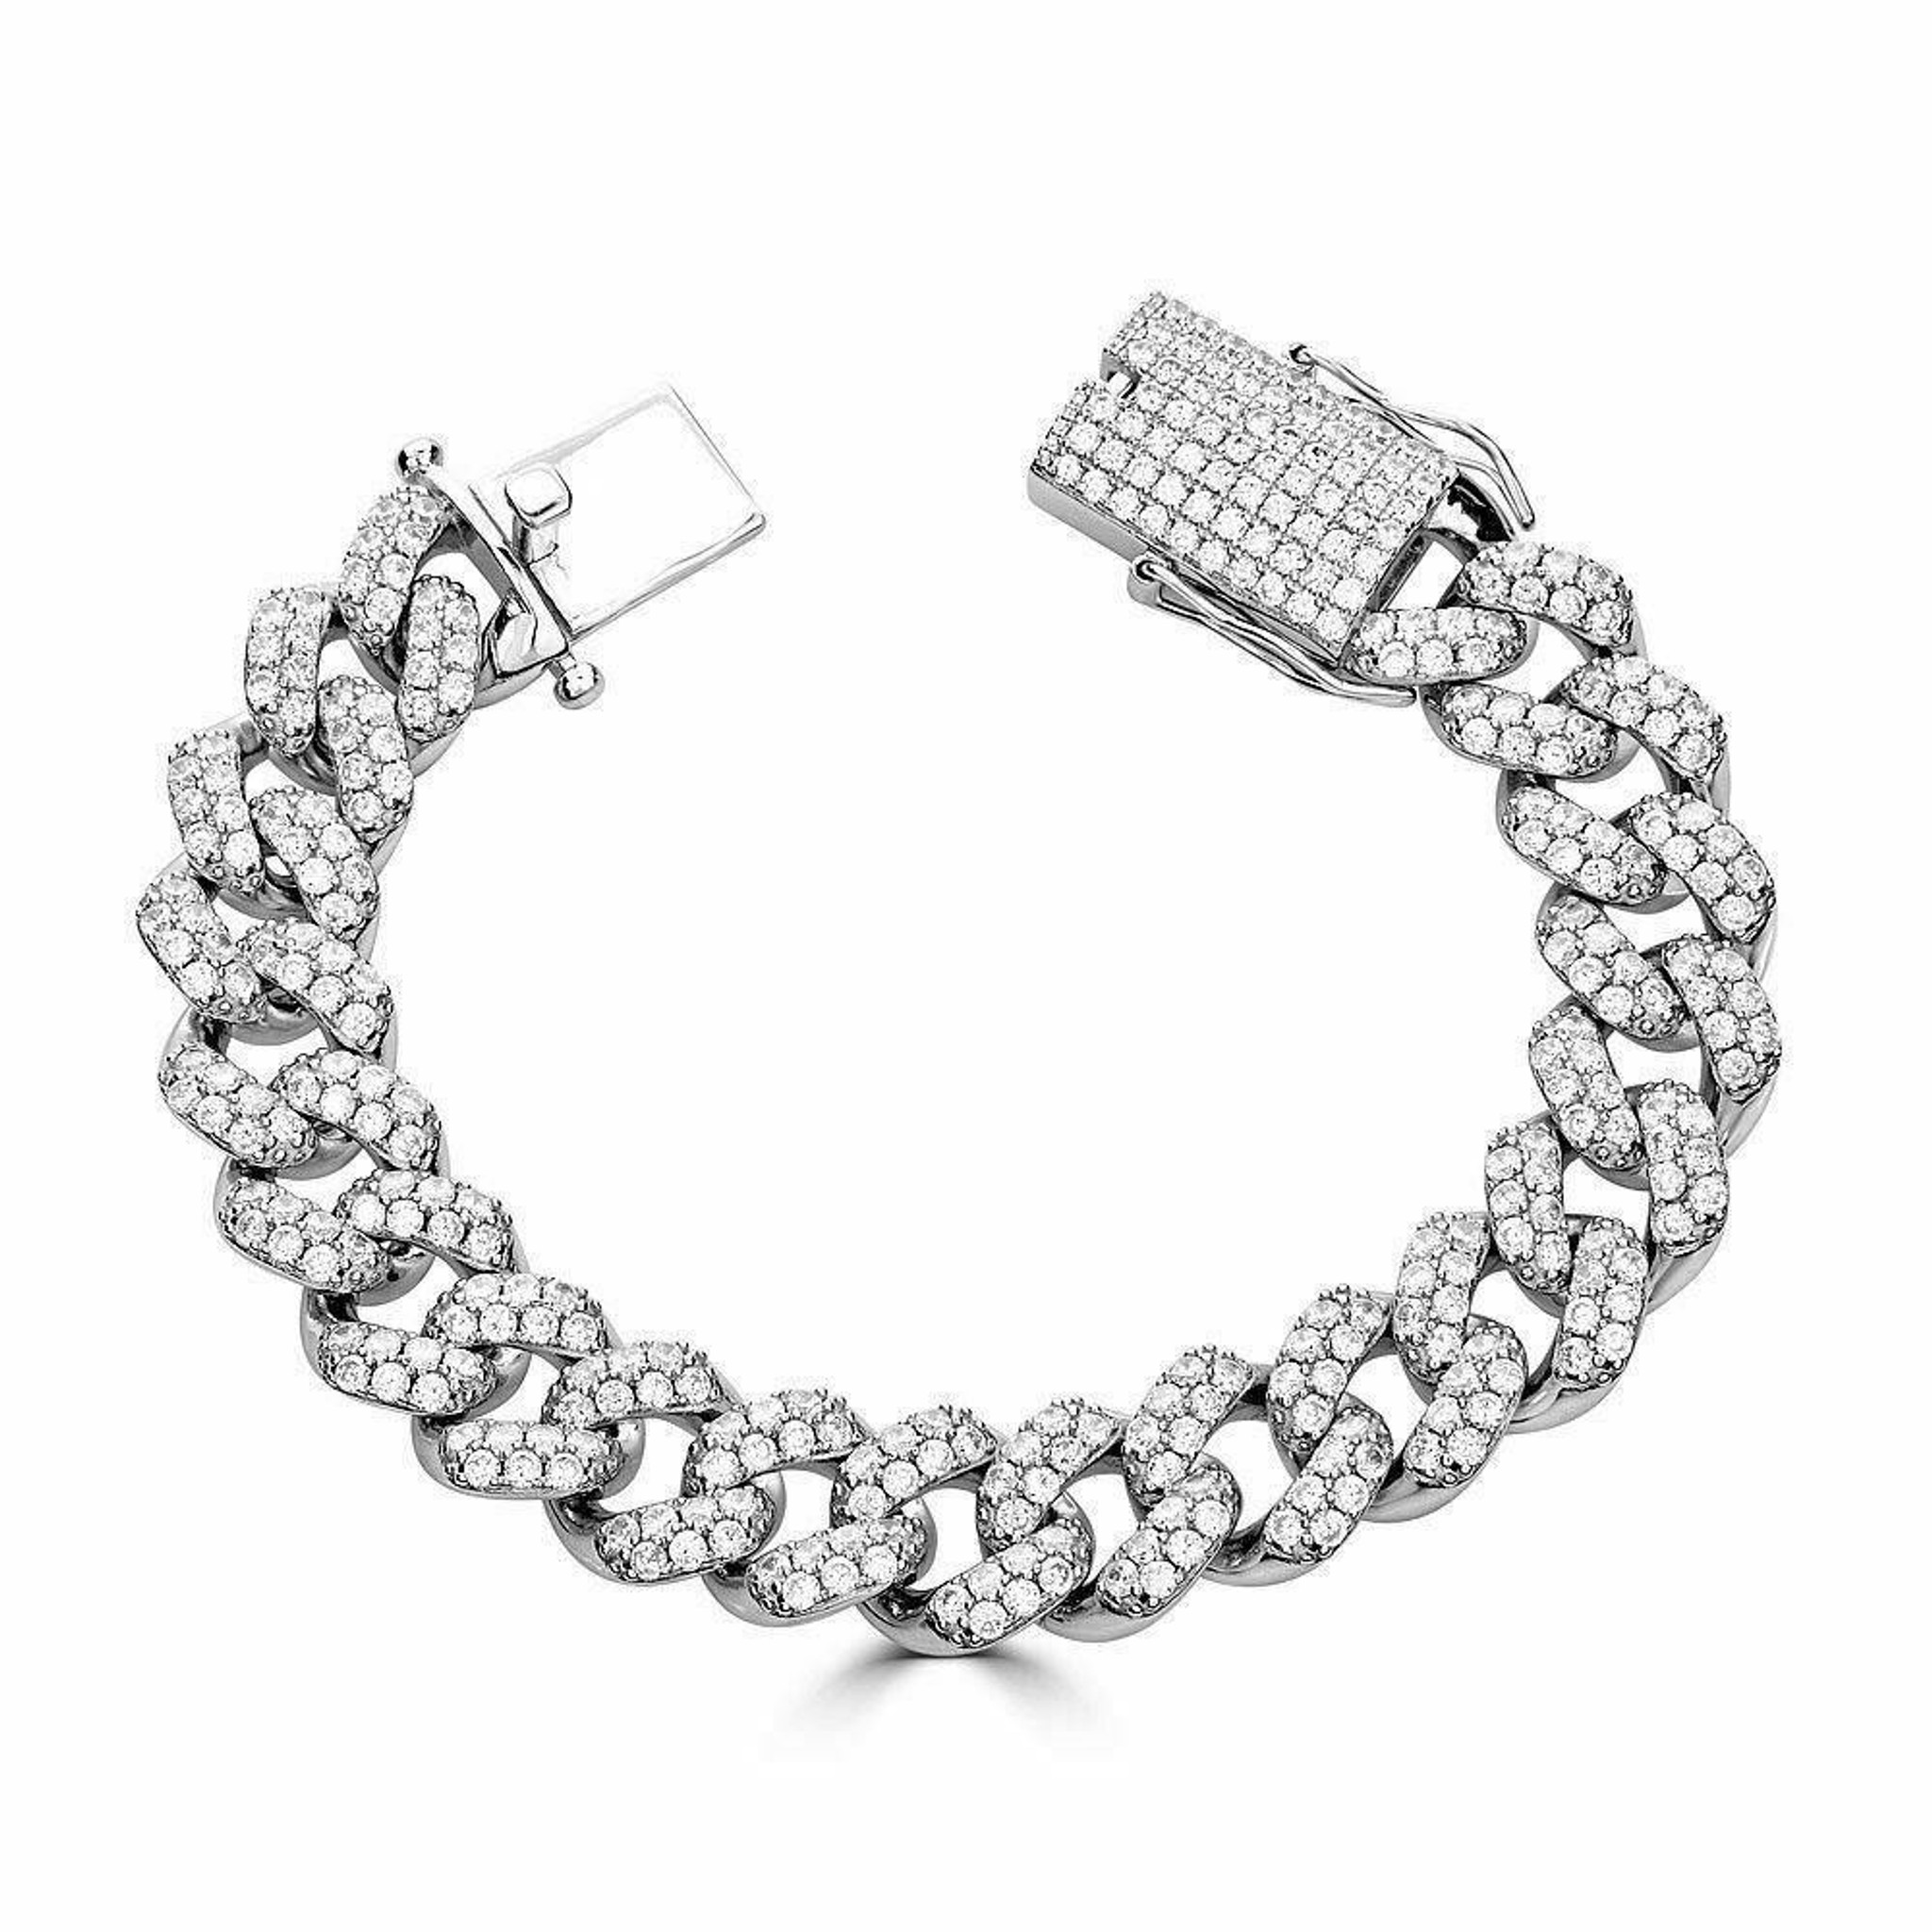 15mm Silver Iced Out Cuban Link CZ Diamond Bracelet – Icey Bling